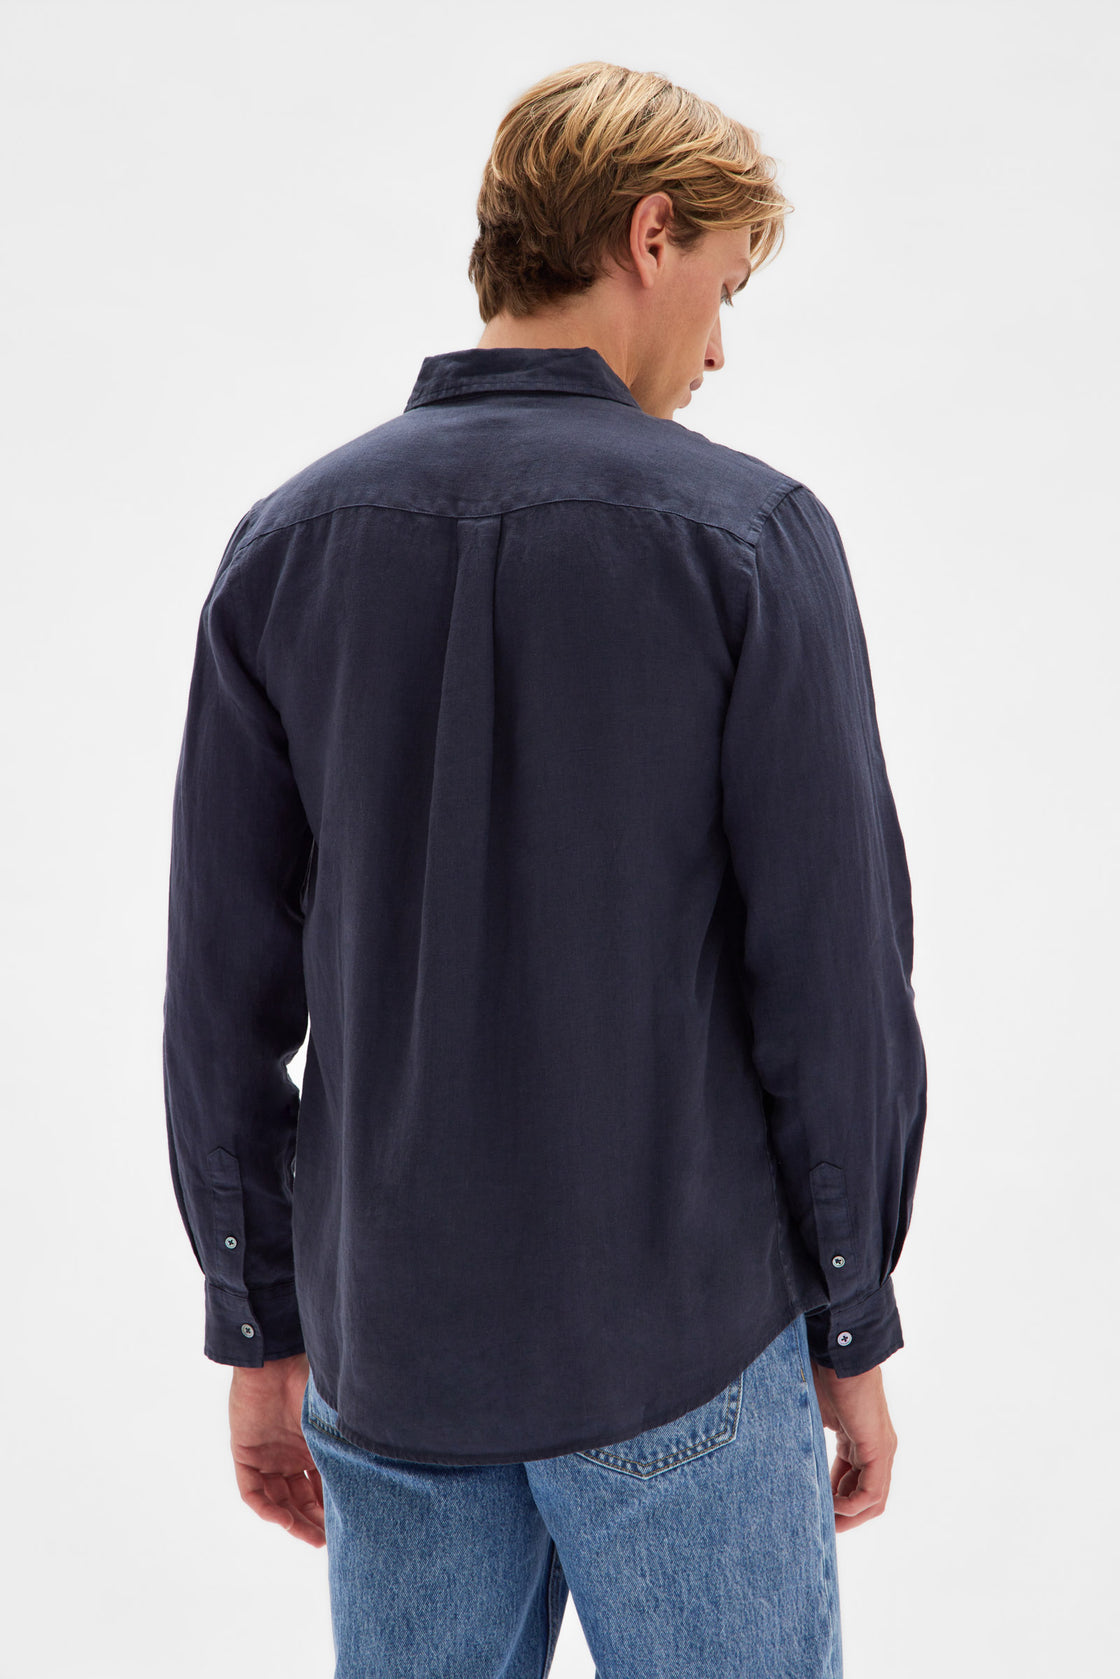 Assembly Label | Casual Long Sleeve Shirt - True Navy